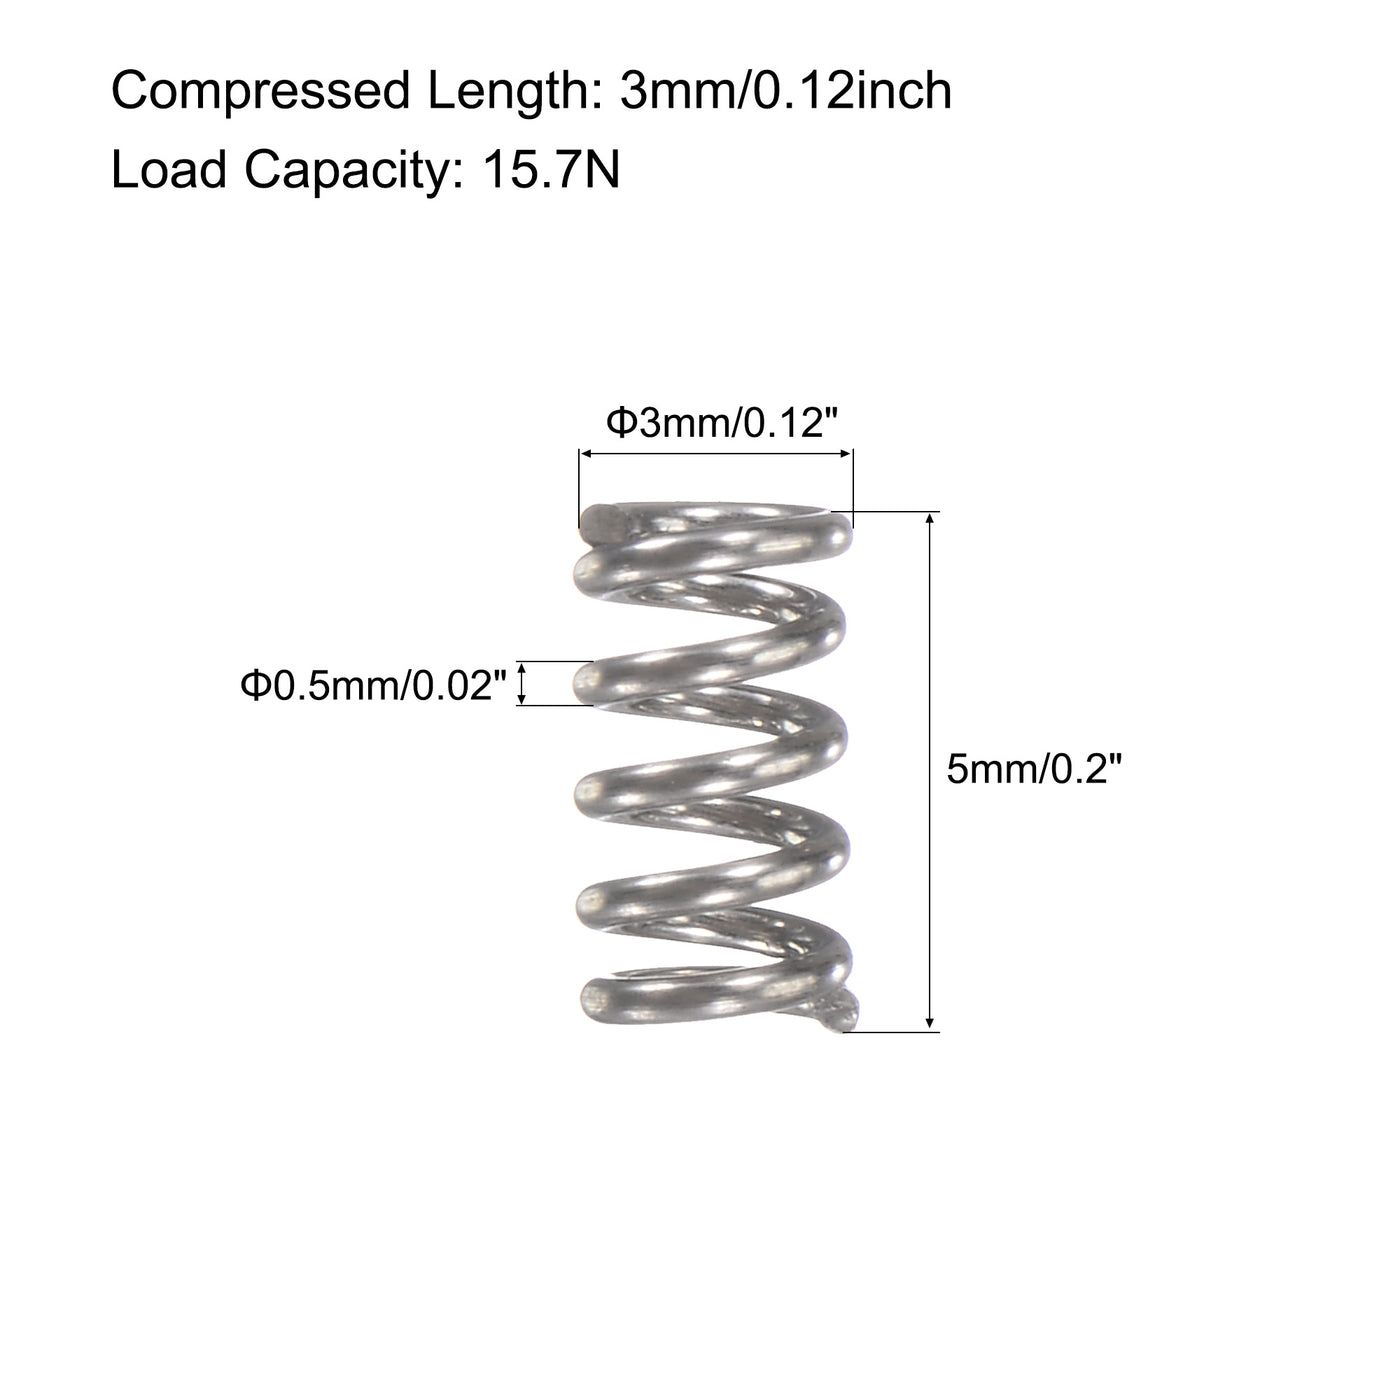 uxcell Uxcell 3mmx0.5mmx5mm 304 Stainless Steel Compression Spring 15.7N Load Capacity 10pcs